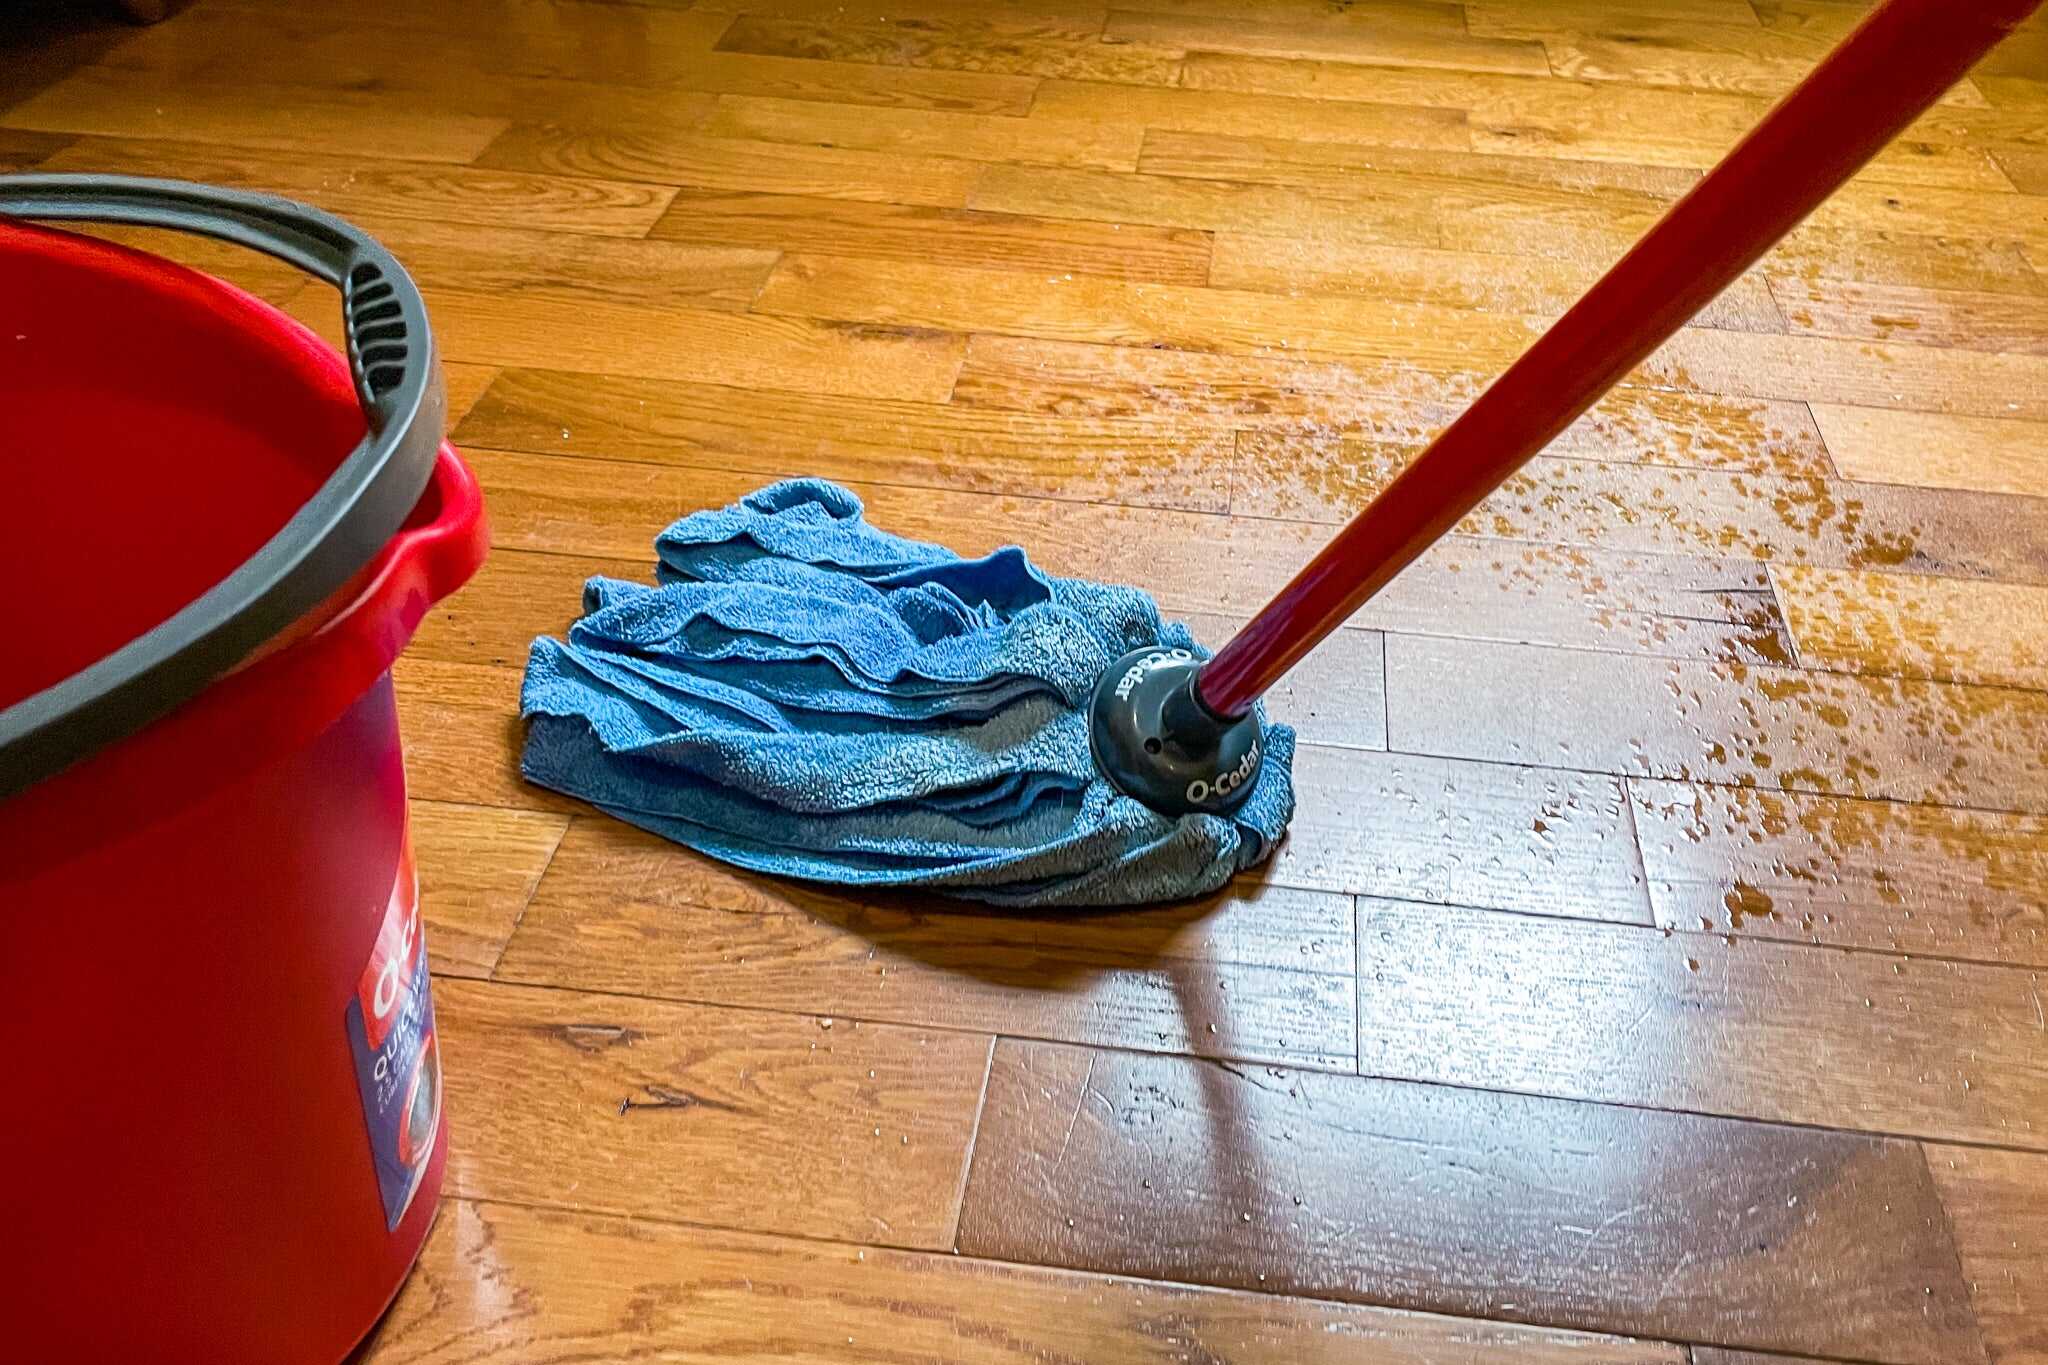 How To Clean Hardwood Floors For A Polished Look